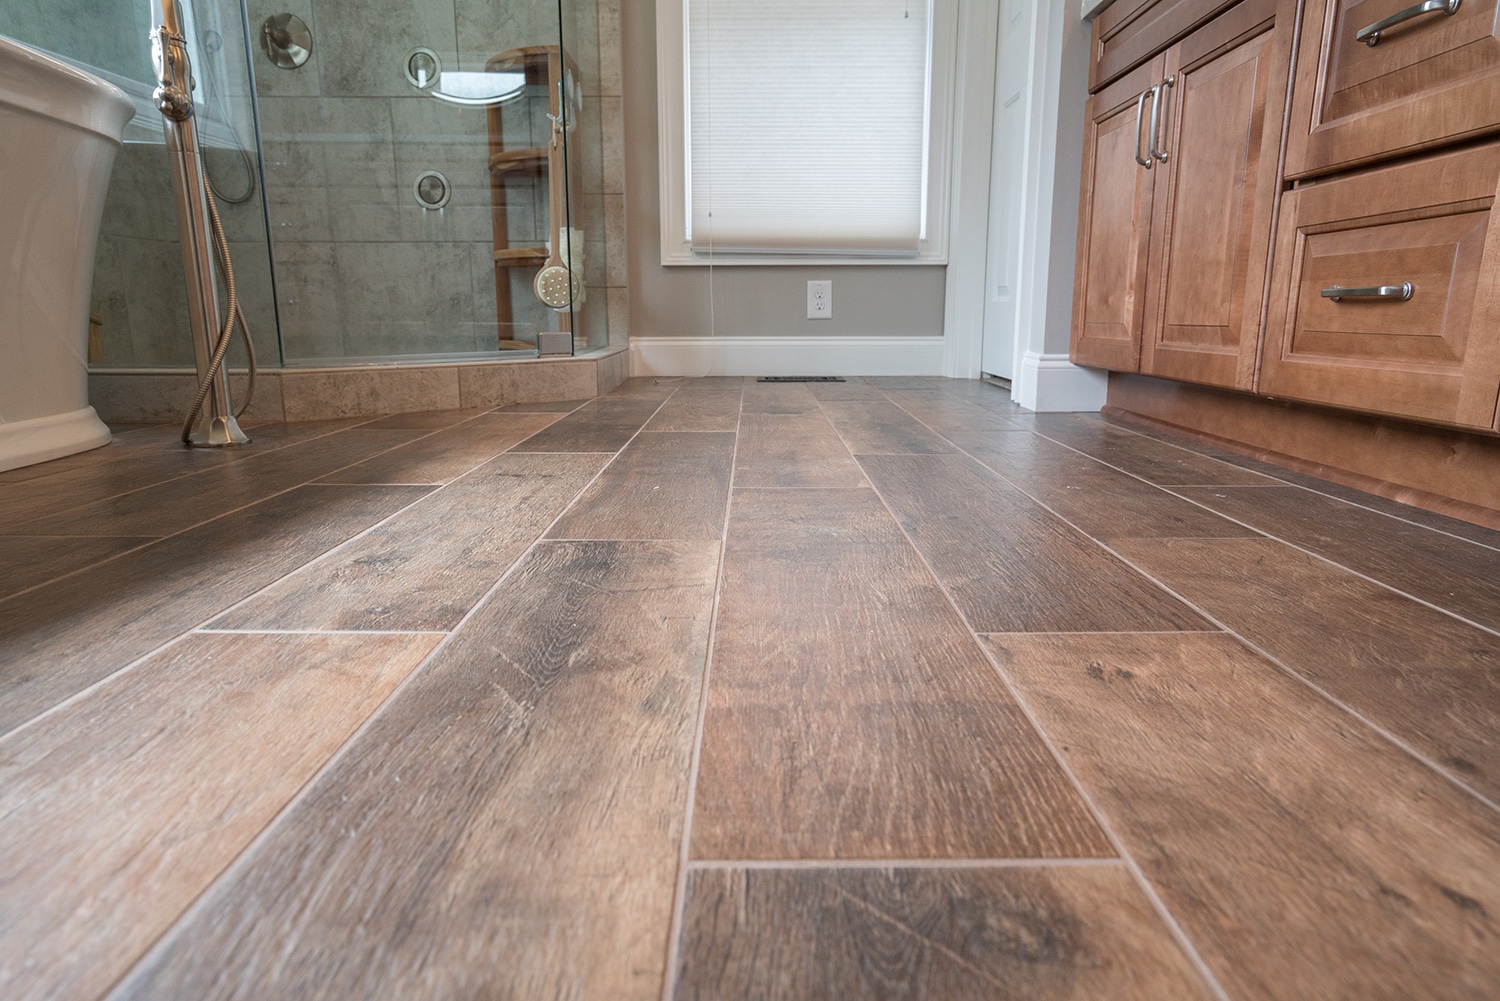 Pros And Cons Of Tile Flooring Tracy, Wood Effect Floor Tiles Pros And Cons